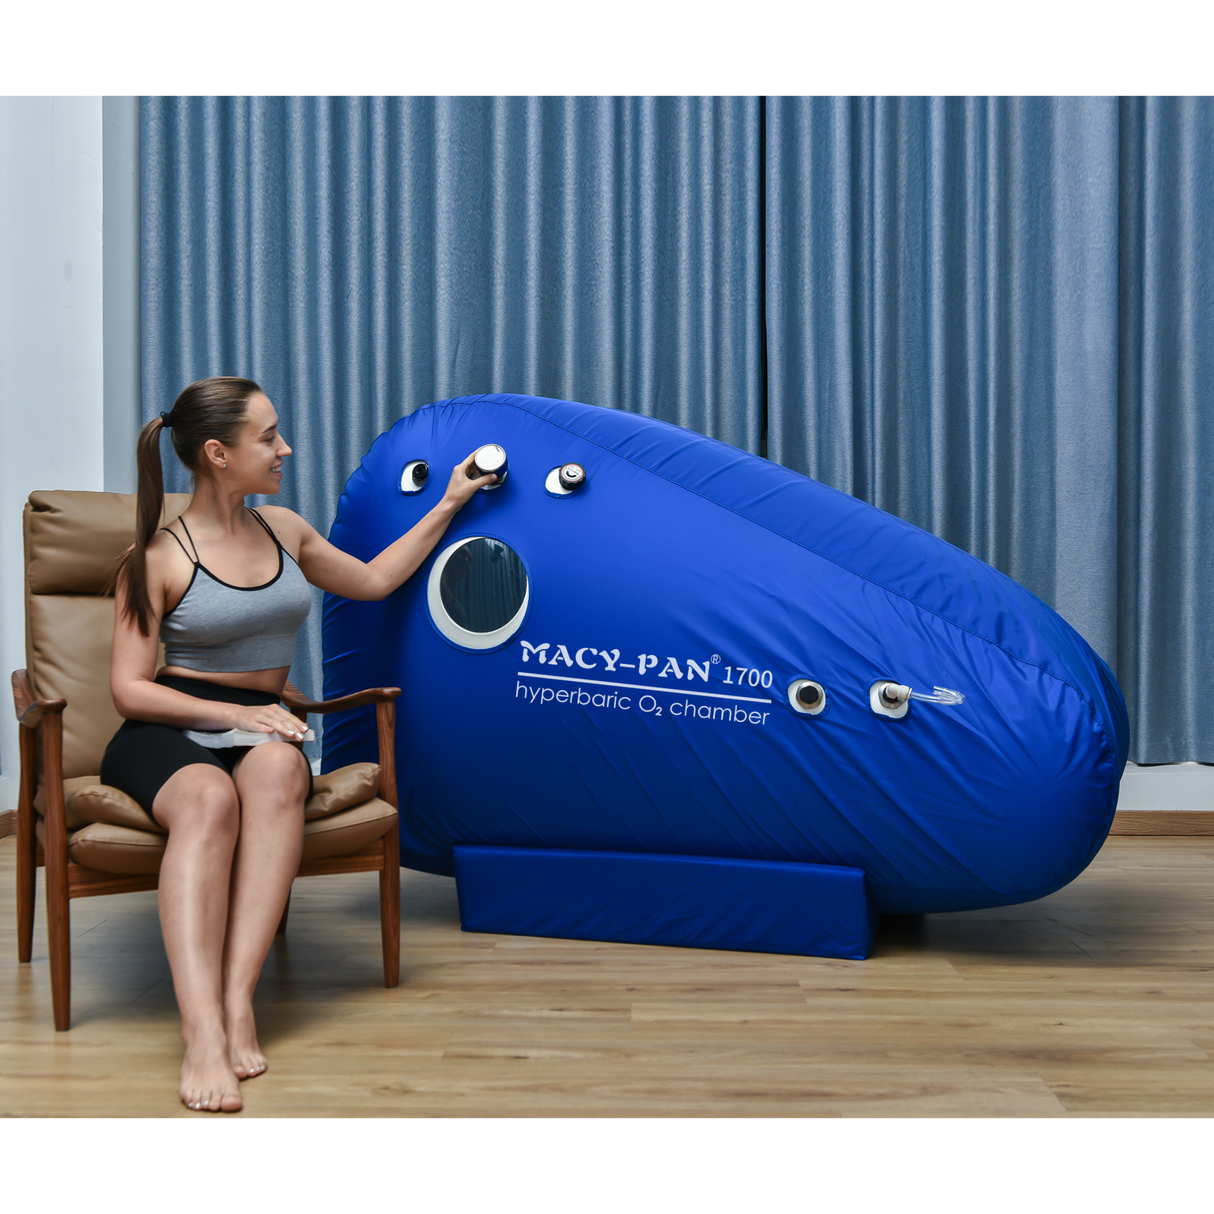 Macy-Pan Hyperbaric Oxygen Therapy Chamber Sitting Type - ST1700